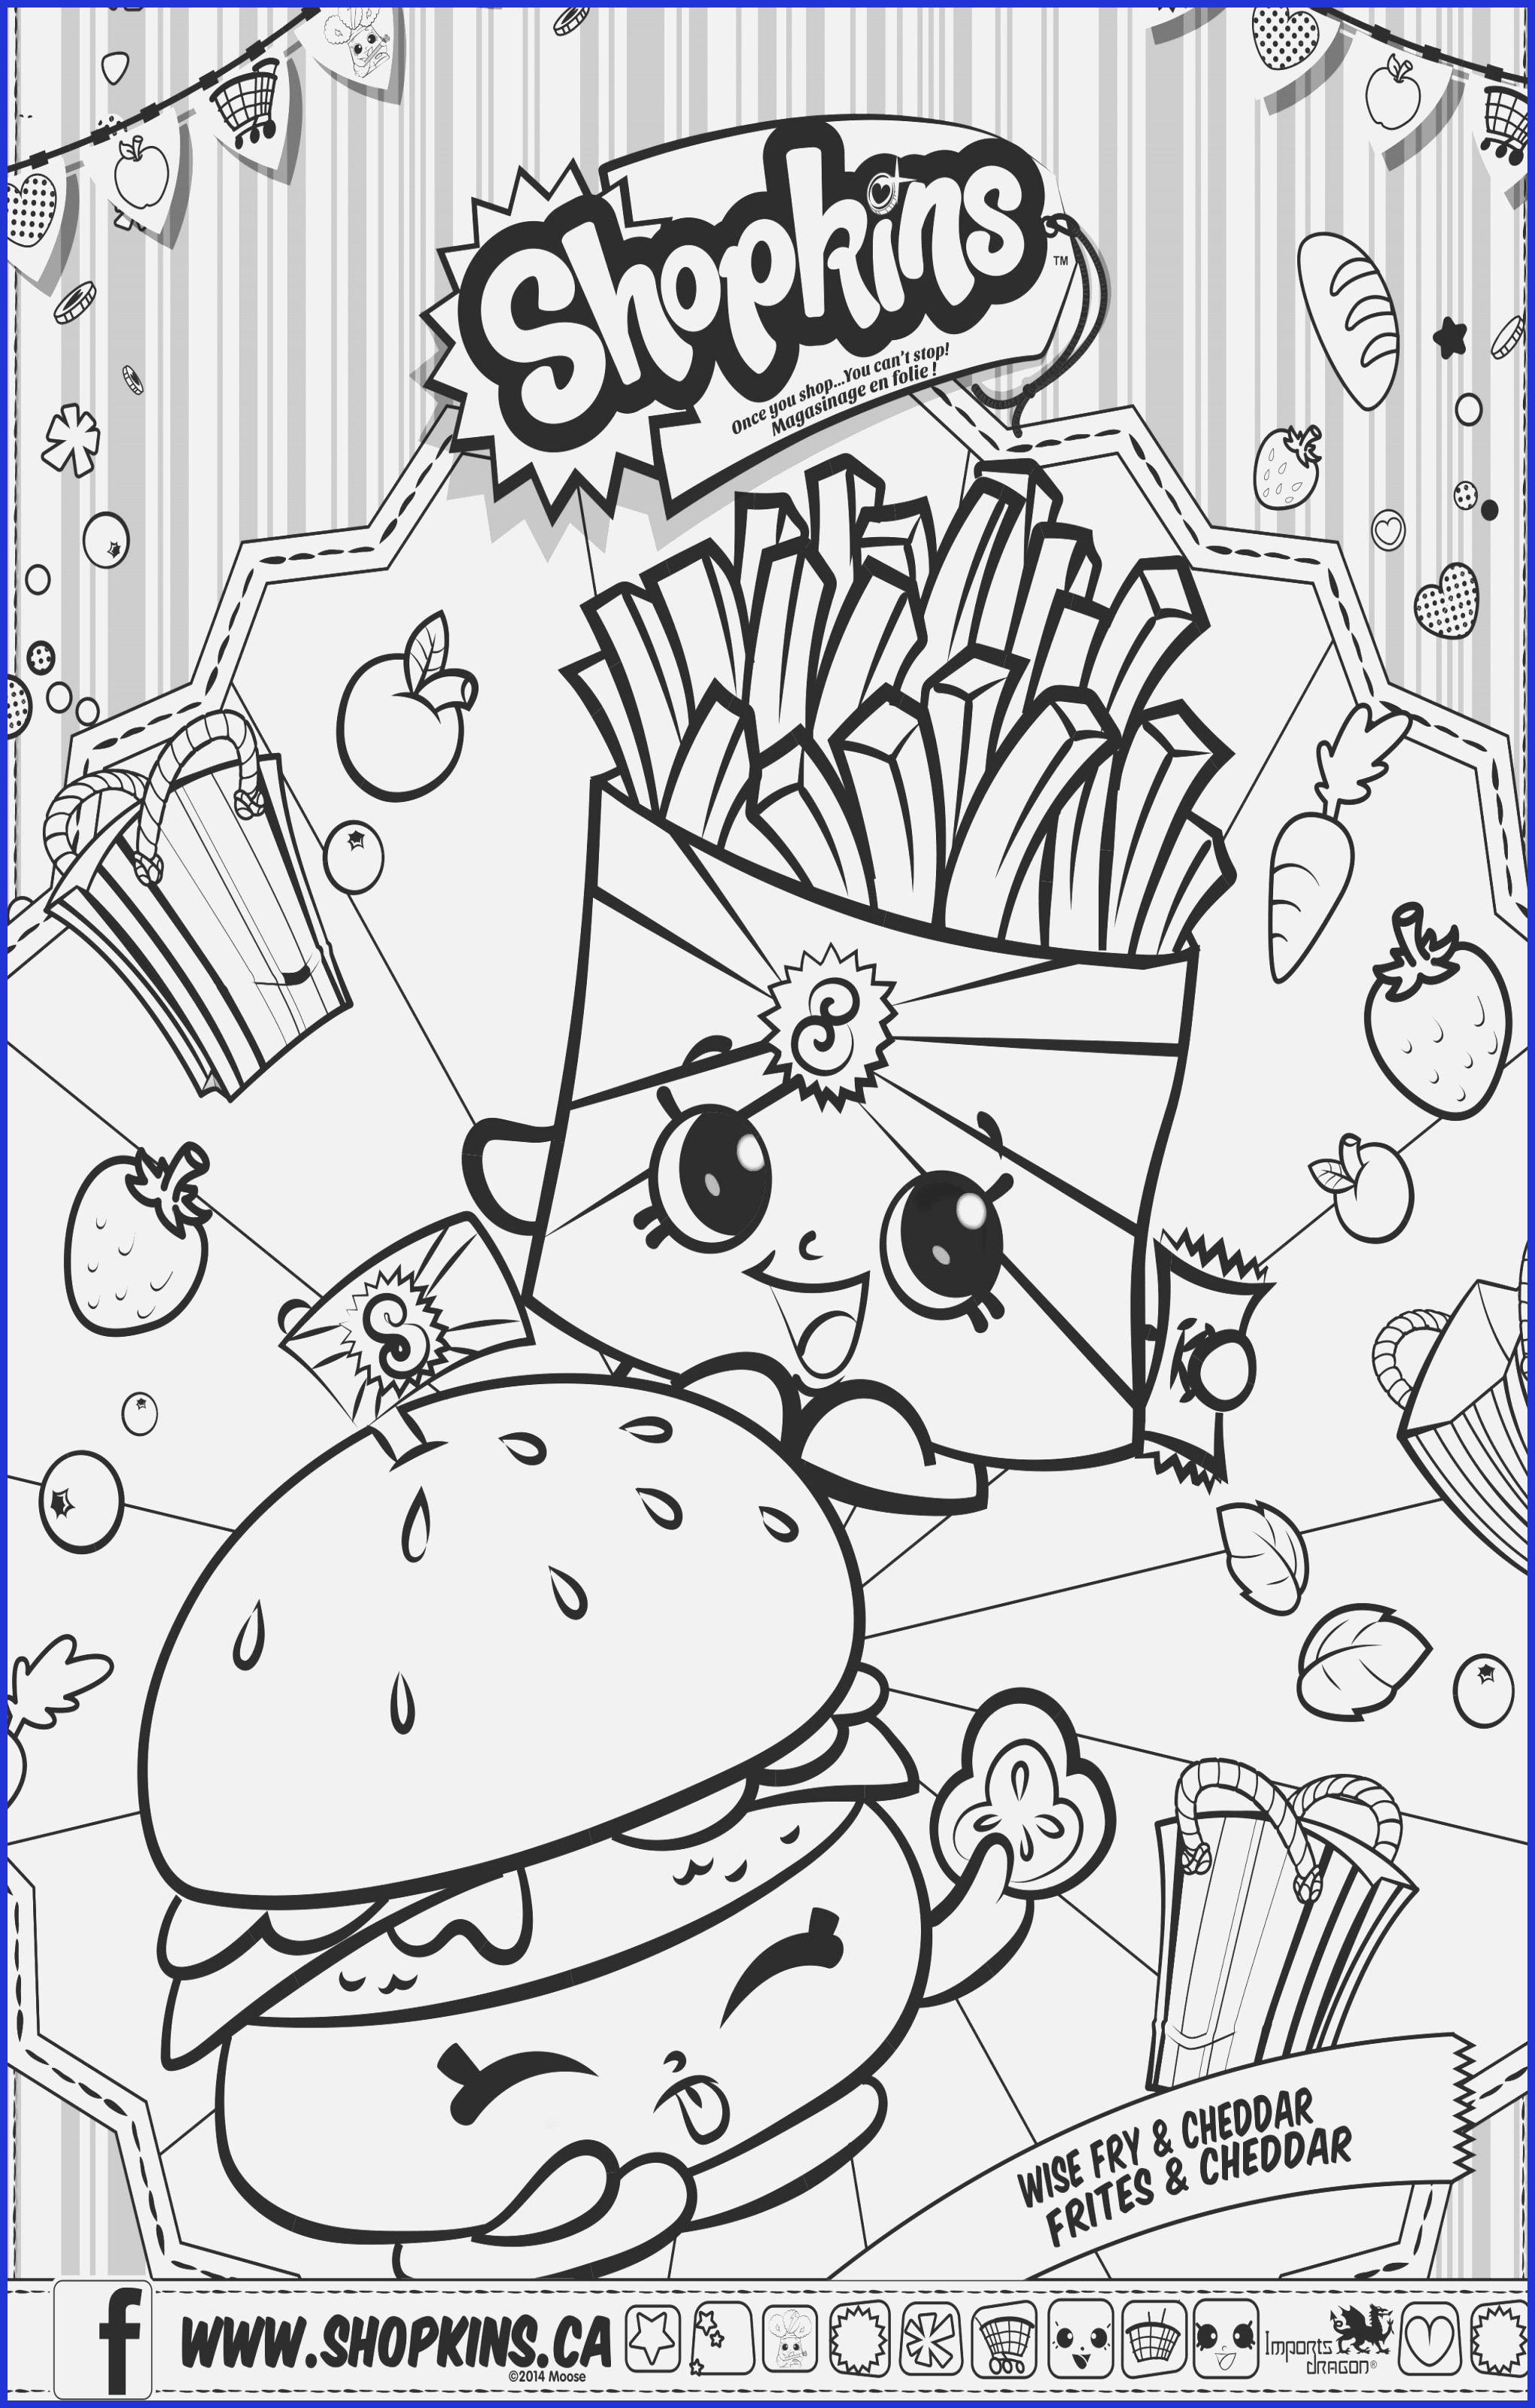 Food Pyramid Coloring Pages Dairy Products Coloring Pages Dairy Products Coloring Pages 14